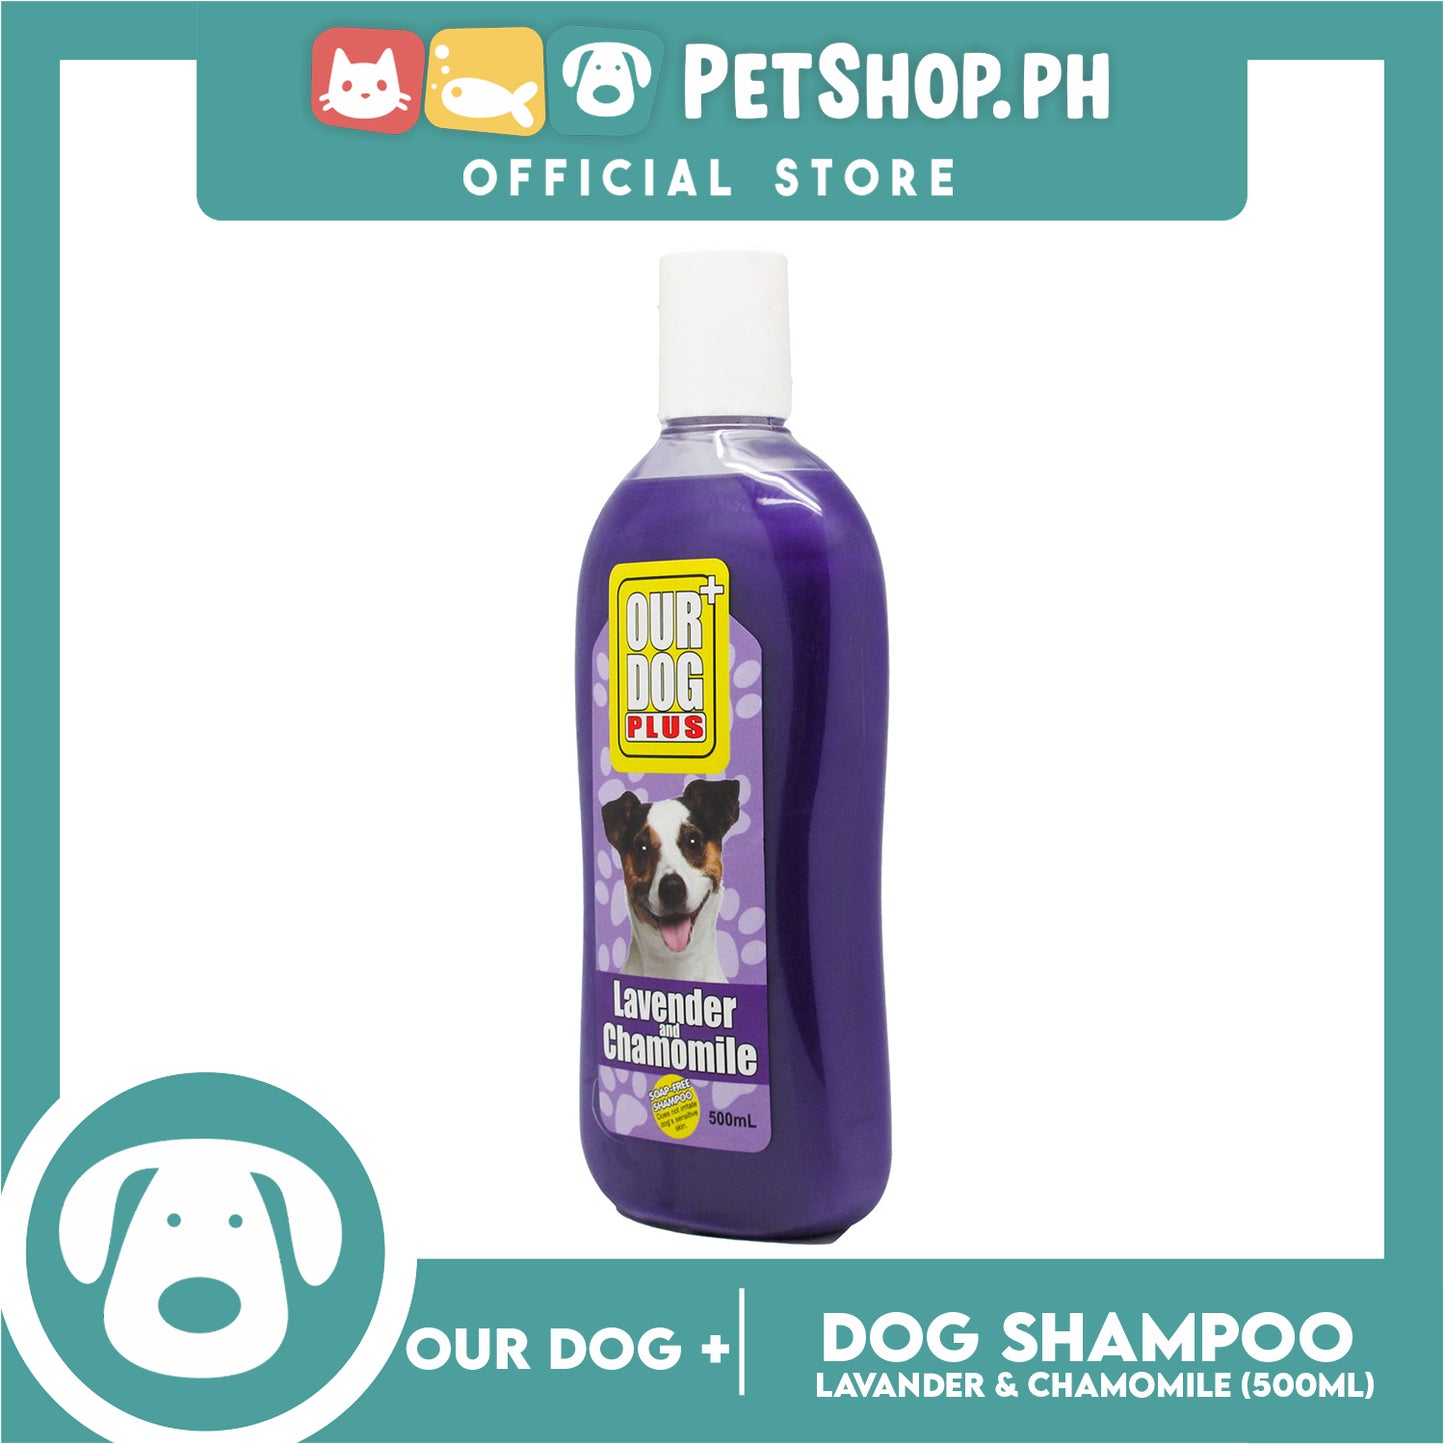 Our Dog Plus Lavender and Chamomile Shampoo